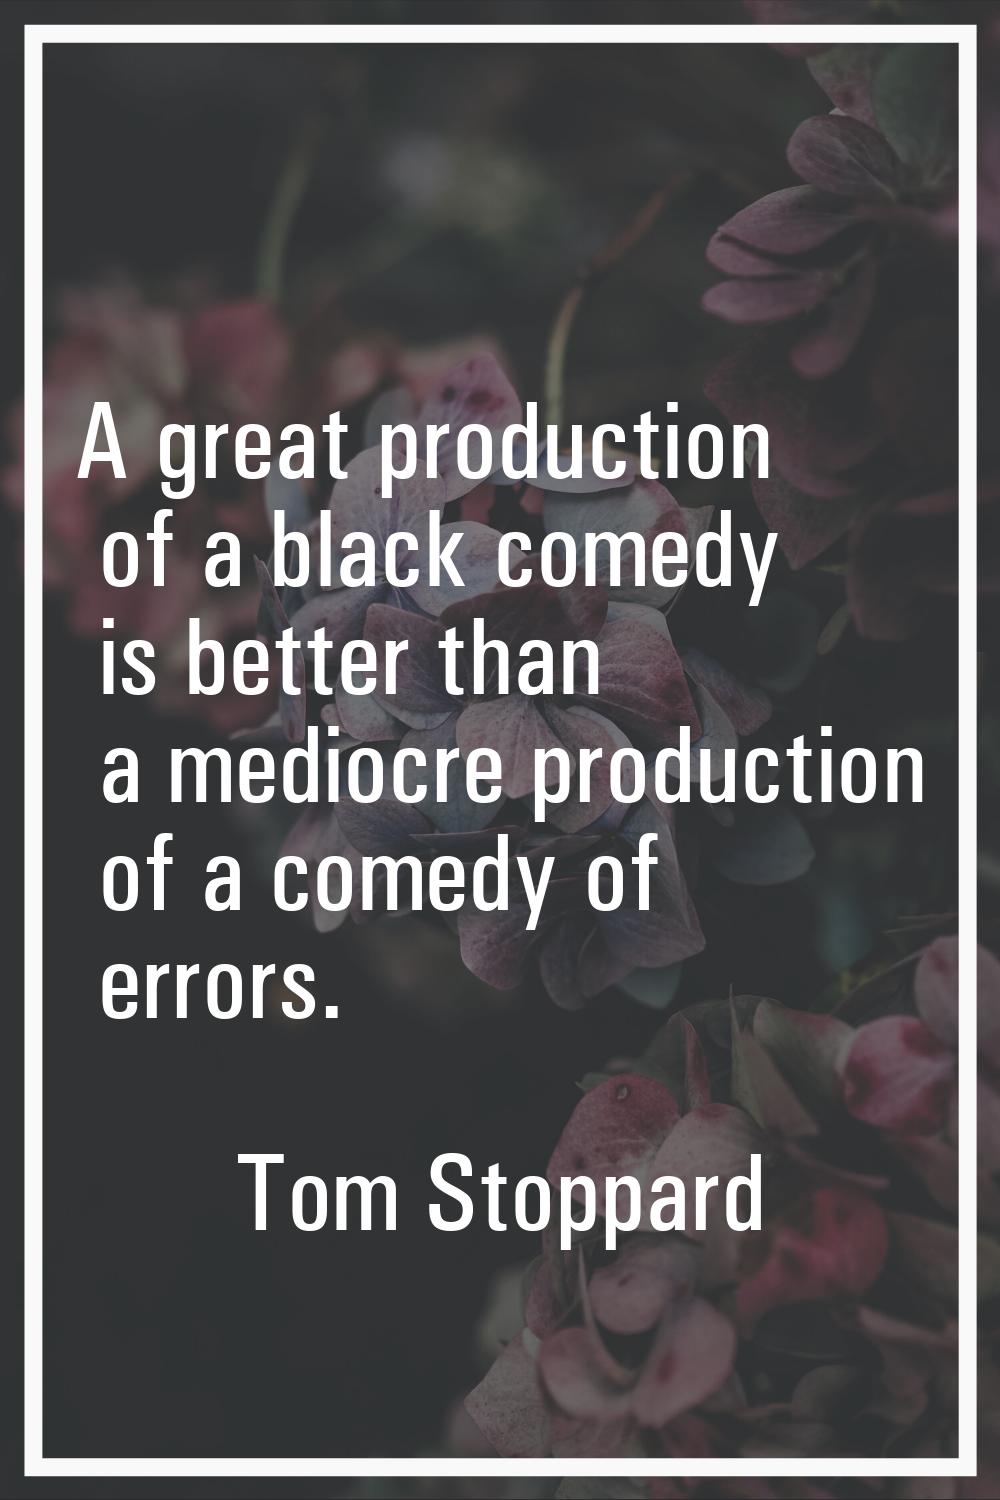 A great production of a black comedy is better than a mediocre production of a comedy of errors.